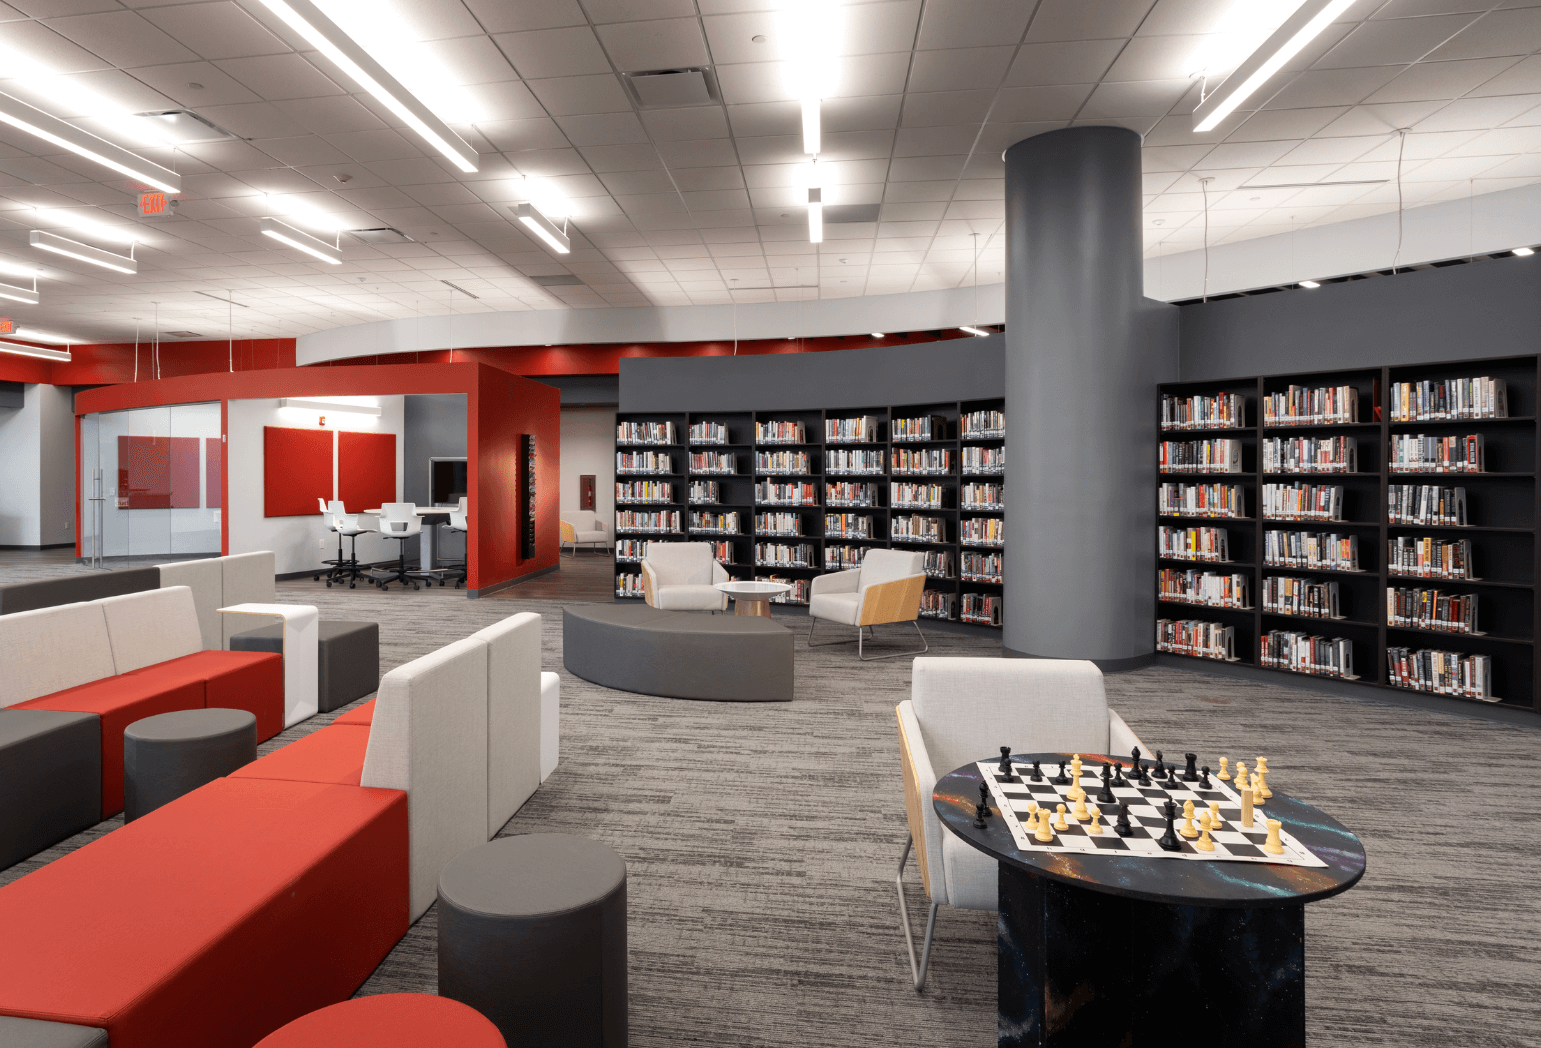 A school library with red seating accents.